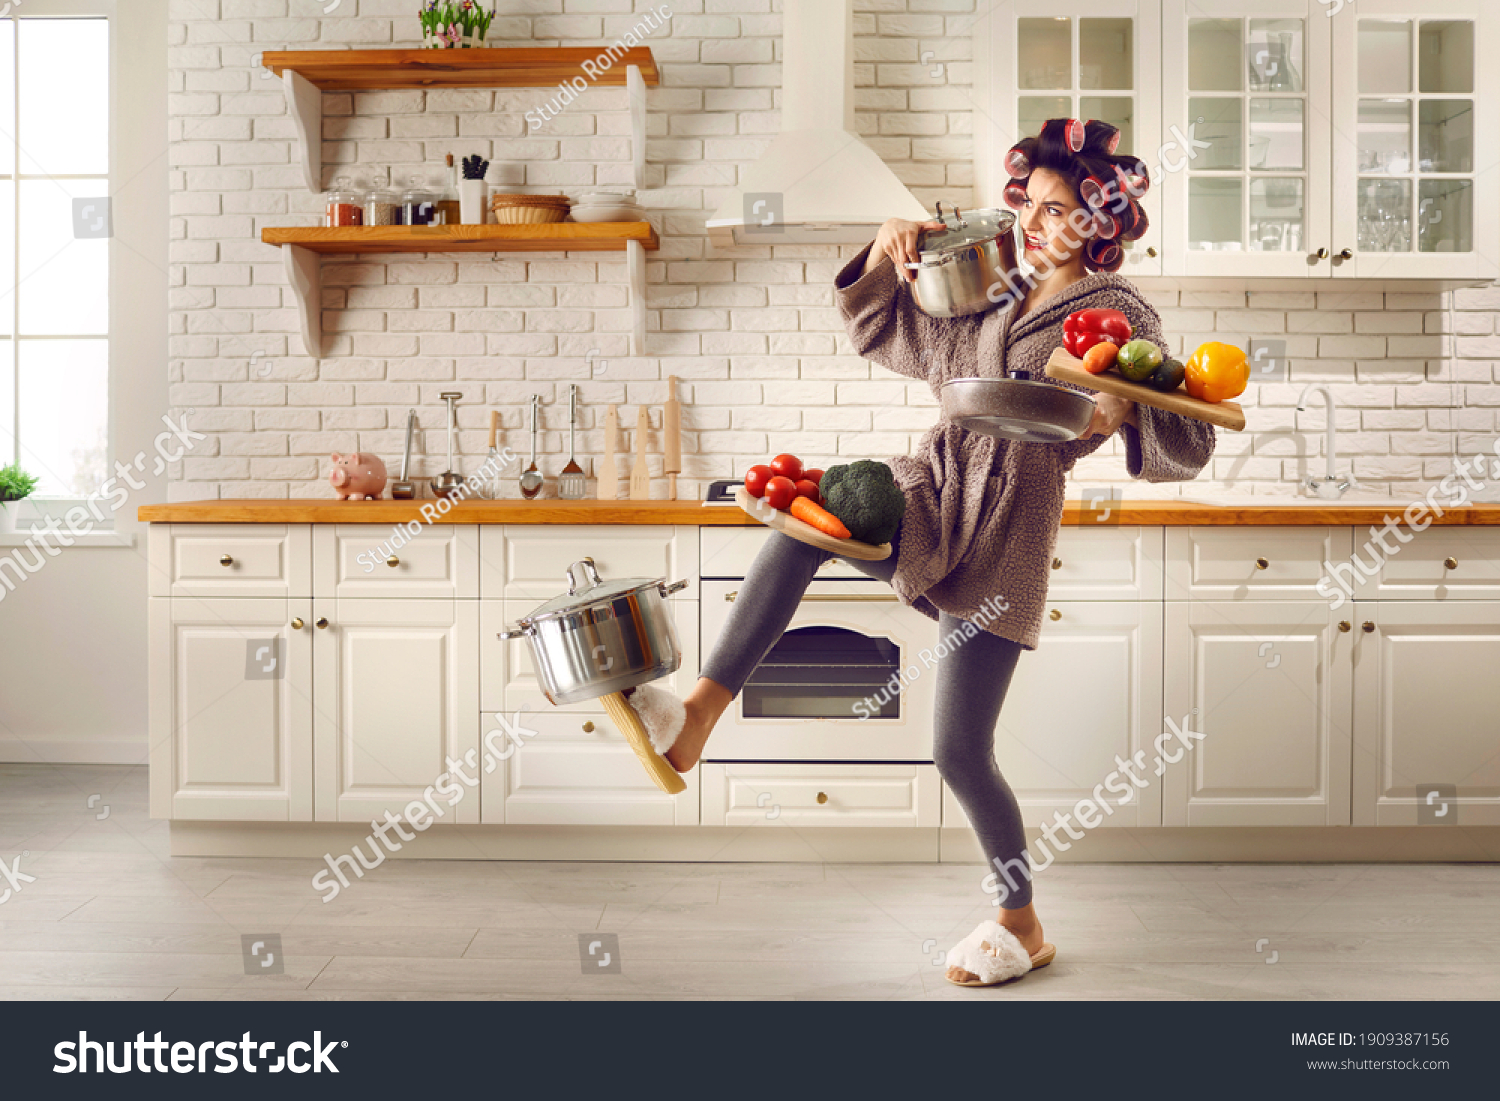 Tired housewife cooking food and carrying lots of stuff. Frail slim young woman making meal at home, holding multiple heavy cooking pots and kitchen saucepans, balancing cutting boards with vegetables #1909387156